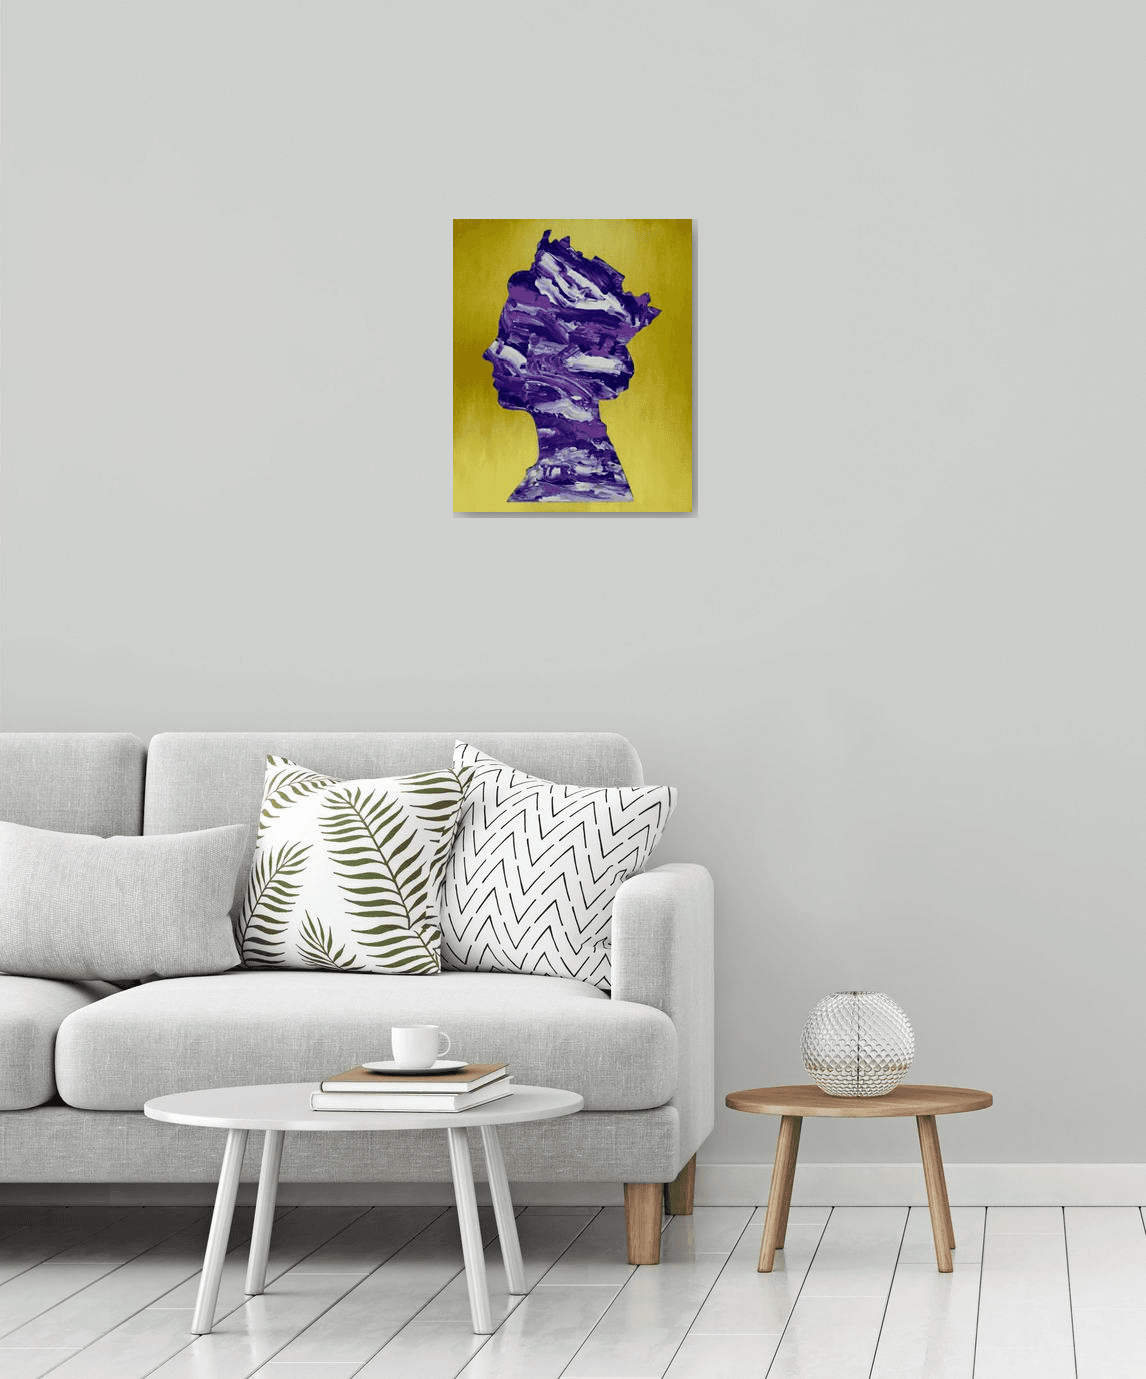 Queen #47 on gold  purple marble PAINTING INSPIRED BY QUEEN ELIZABETH PORTRAIT